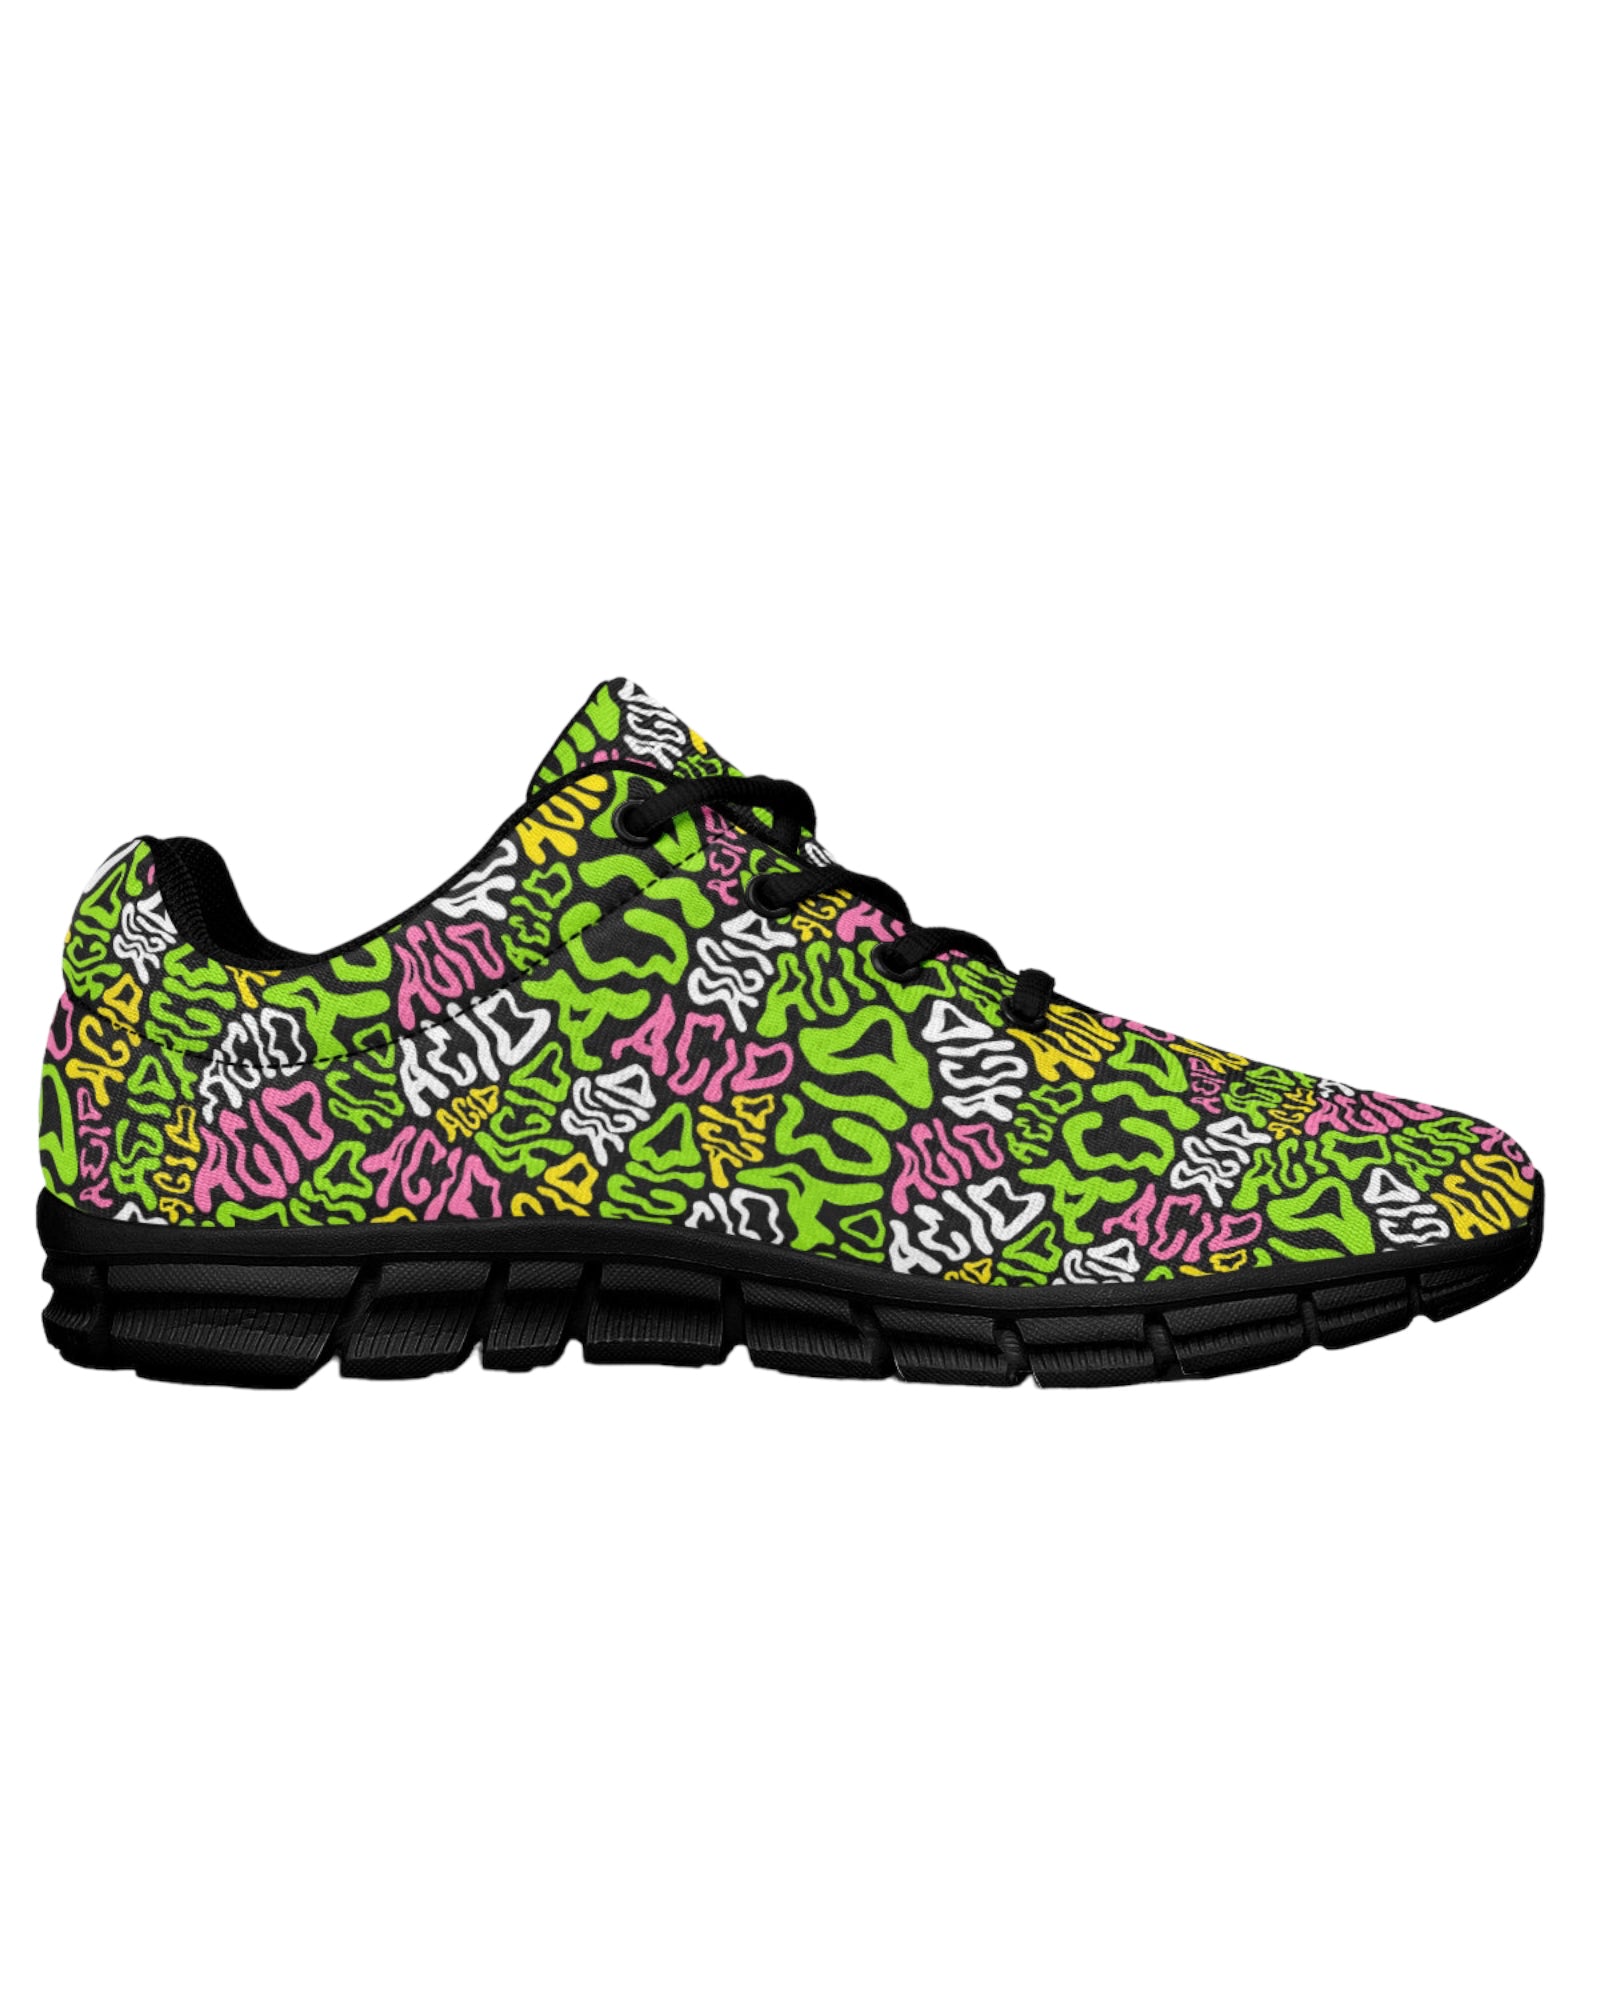 Candy Acid Festival Sneakers